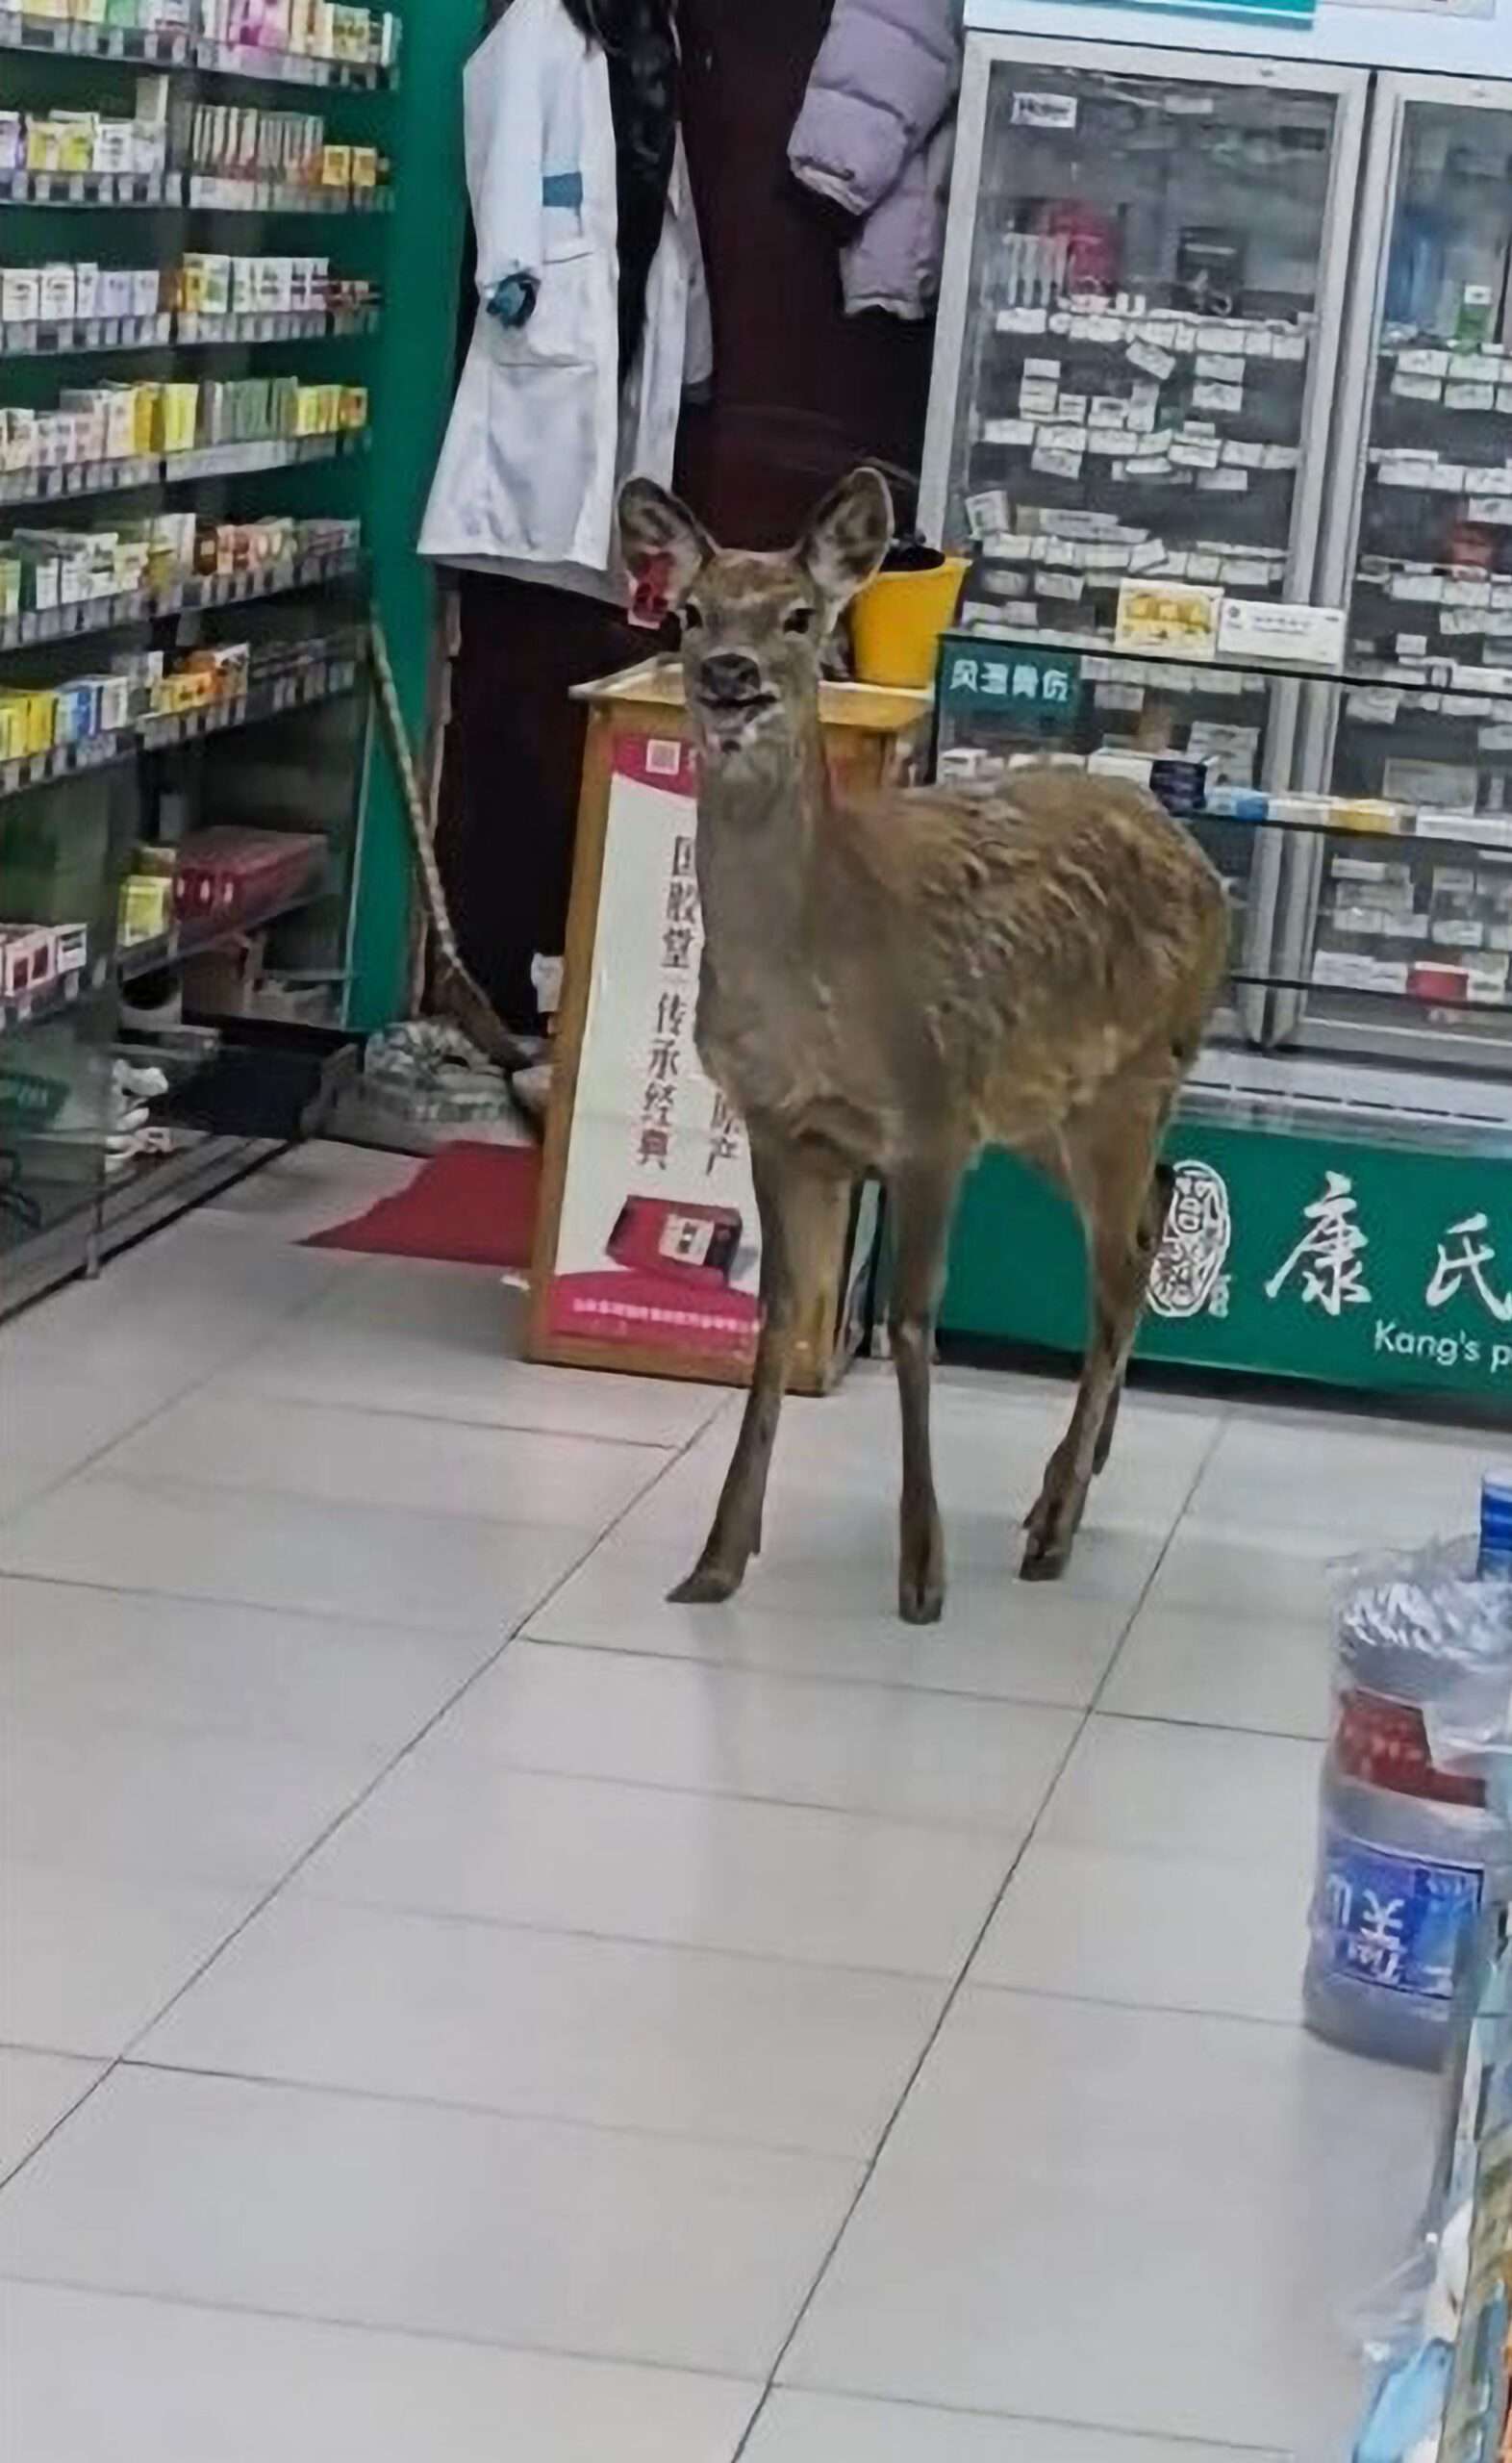 Read more about the article Deer Startles Pharmacist And Customer After Suddenly Walking Into Drugstore